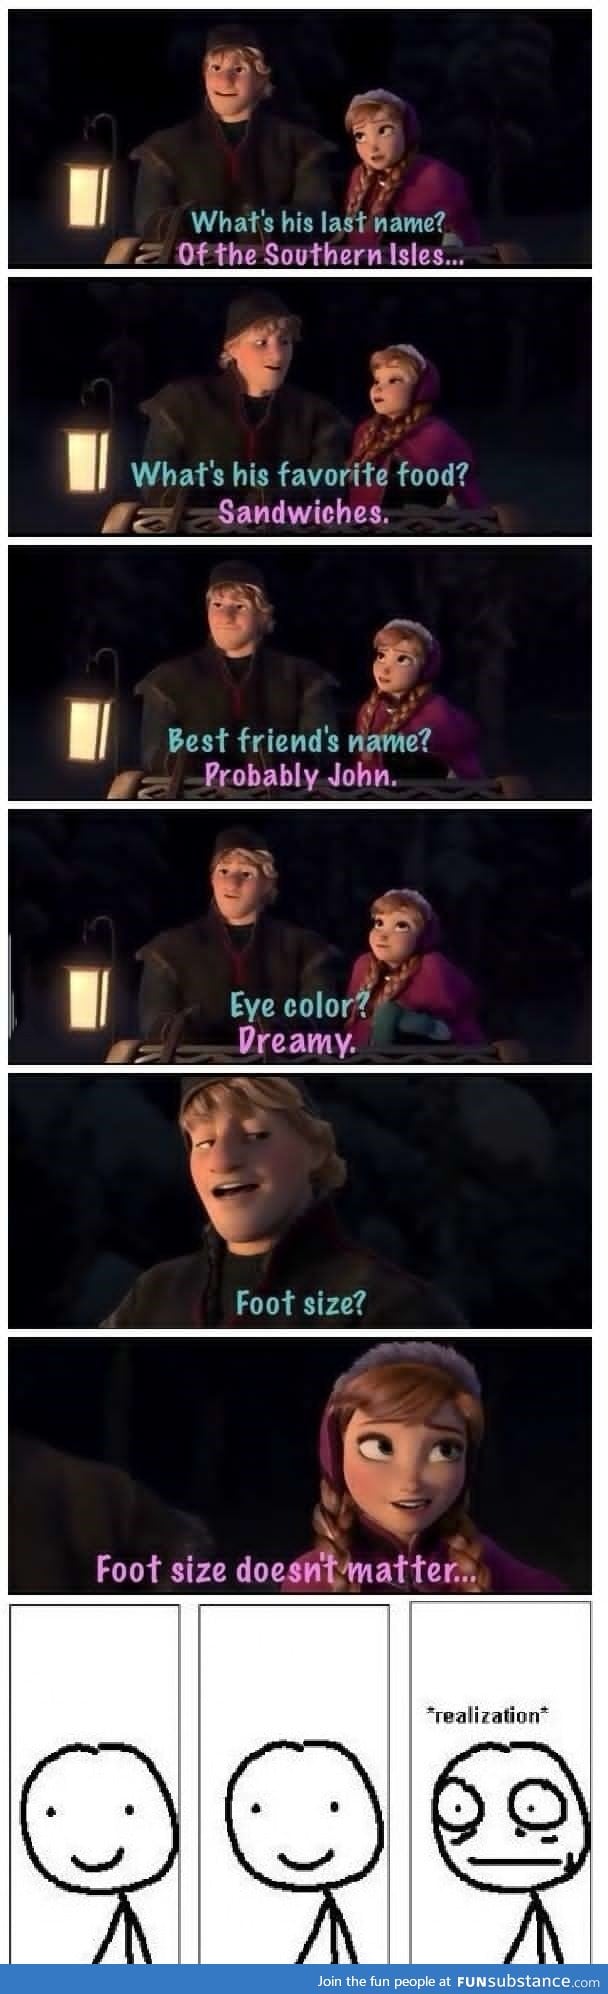 After realizing this Joke, I was Frozen still